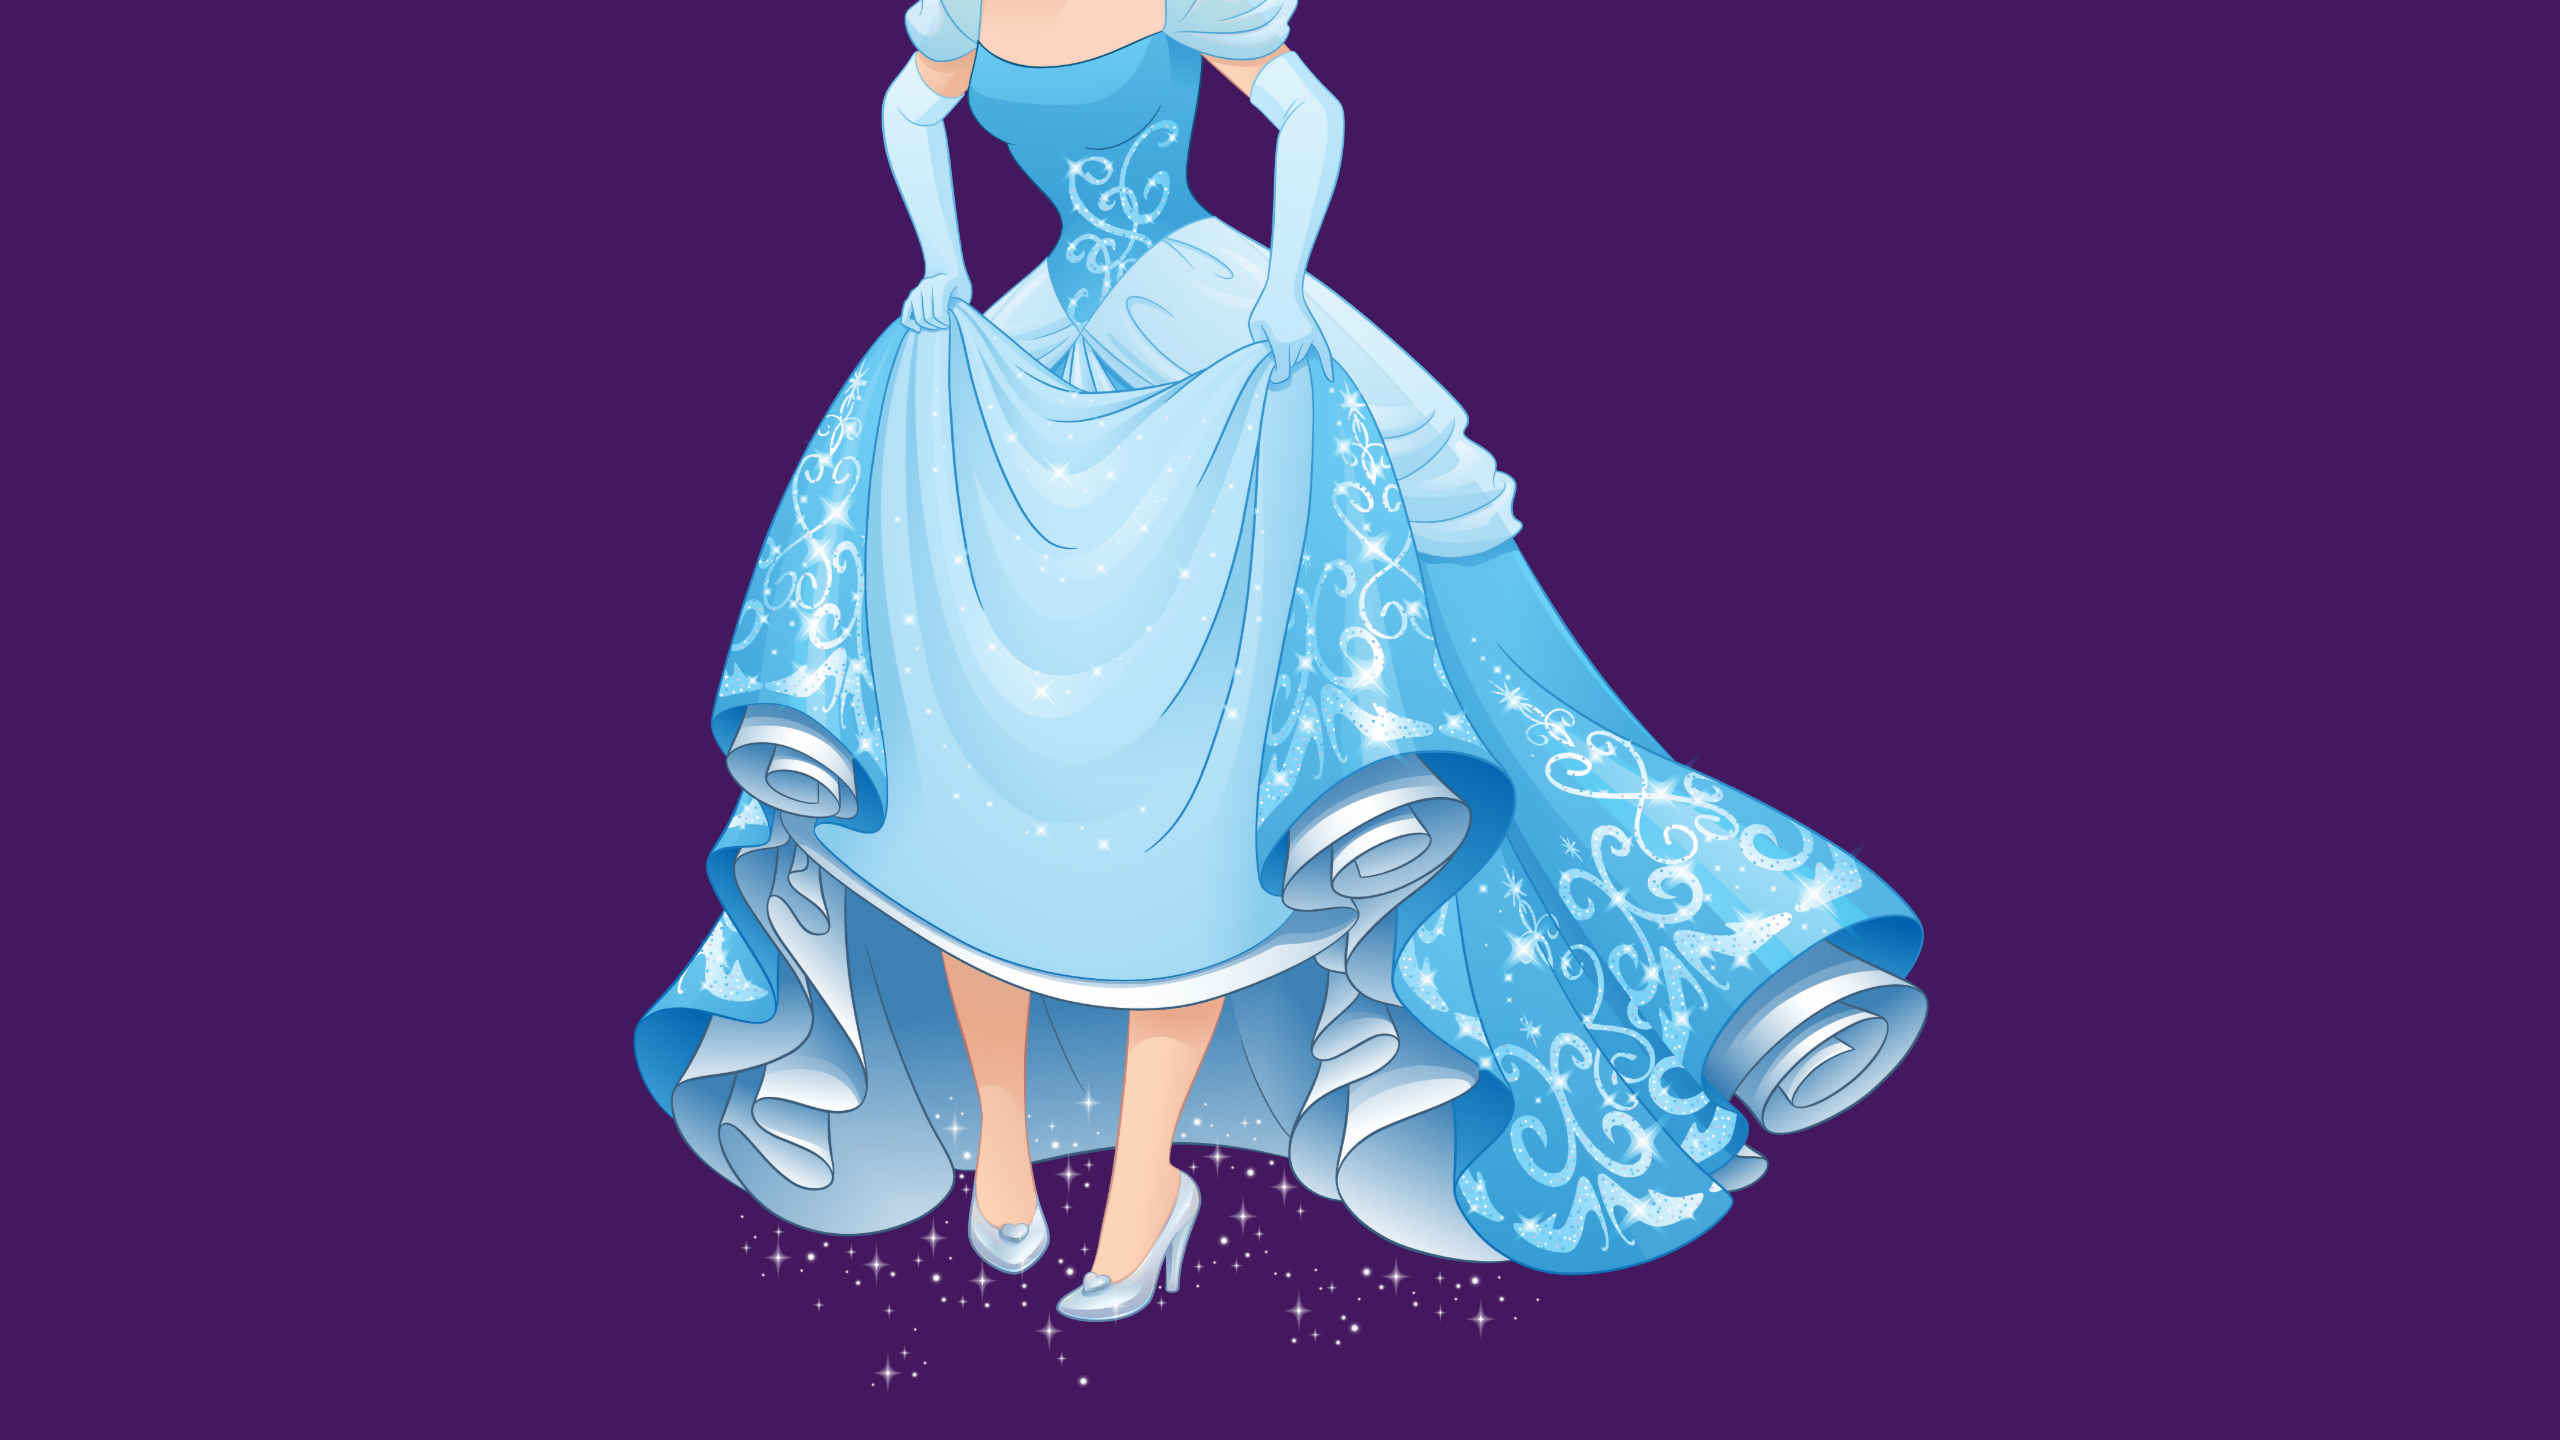 Disney Cinderella HD big wallpapers with beautiful pictures 